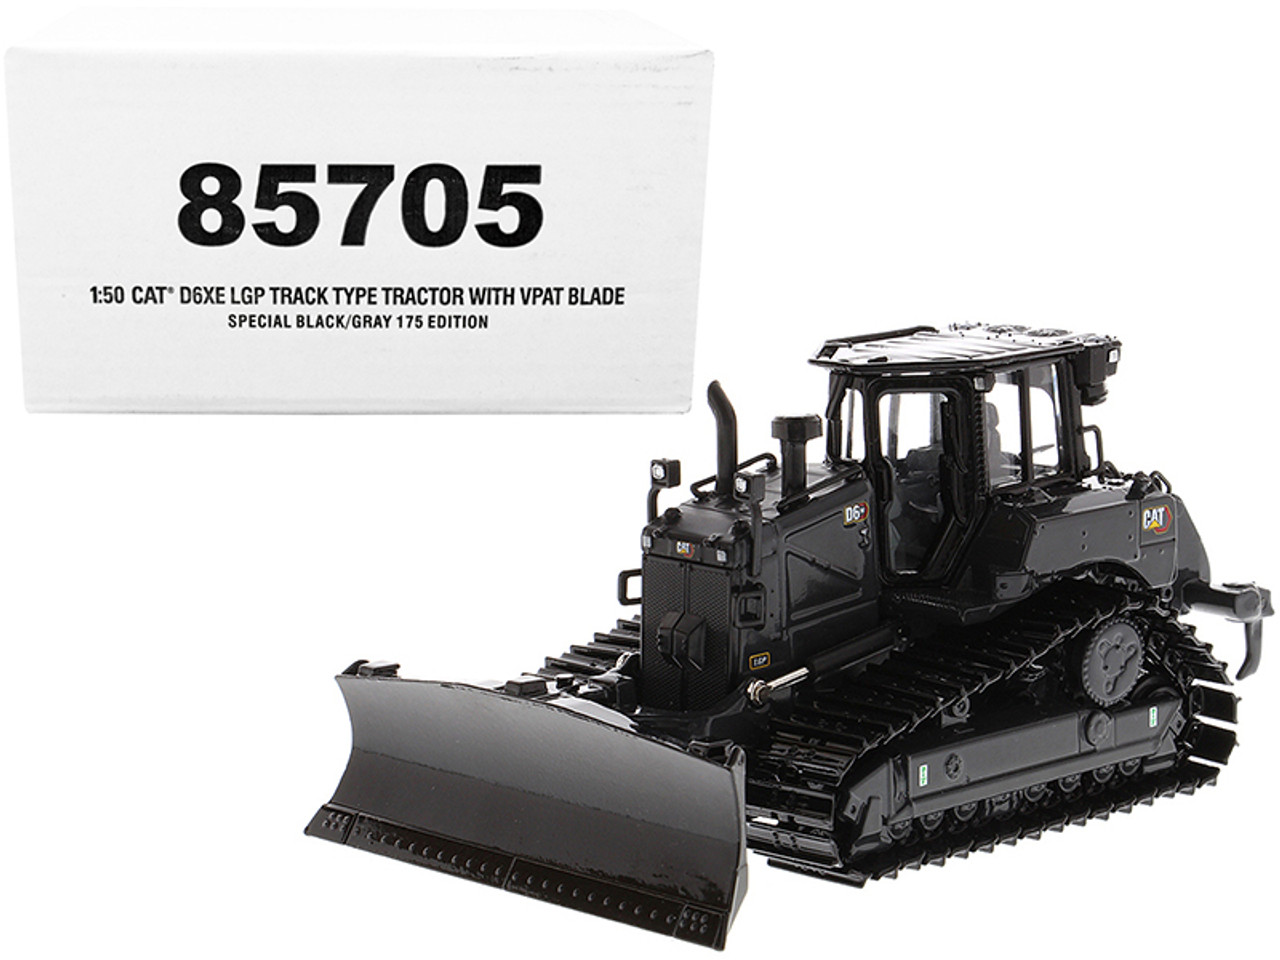 CAT Caterpillar D6 XE LGP Track-Type Tractor Dozer with VPAT Blade and Operator Special Black 175K Edition "High Line" Series 1/50 Diecast Model by Diecast Masters